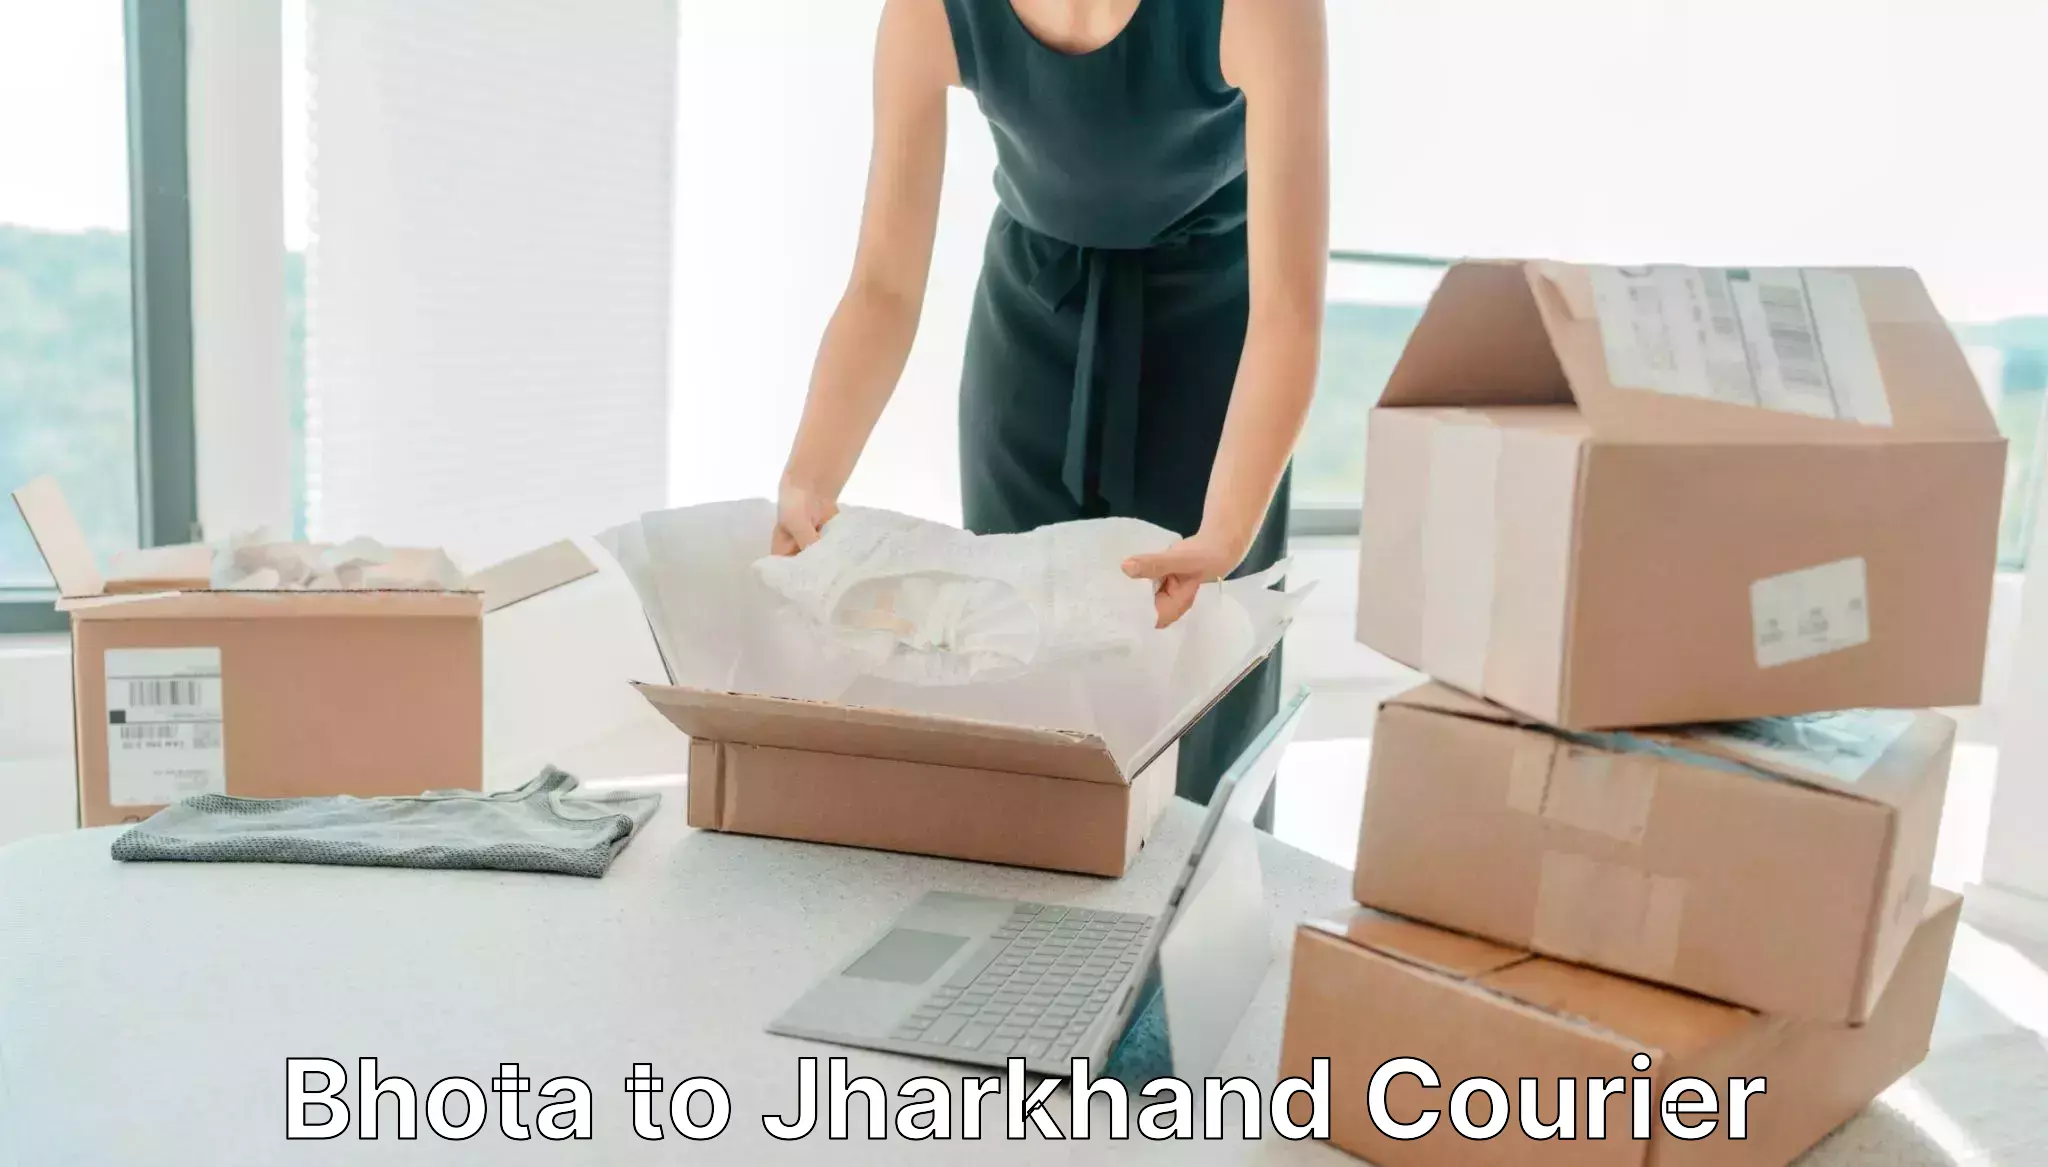 Local delivery service Bhota to Jharkhand